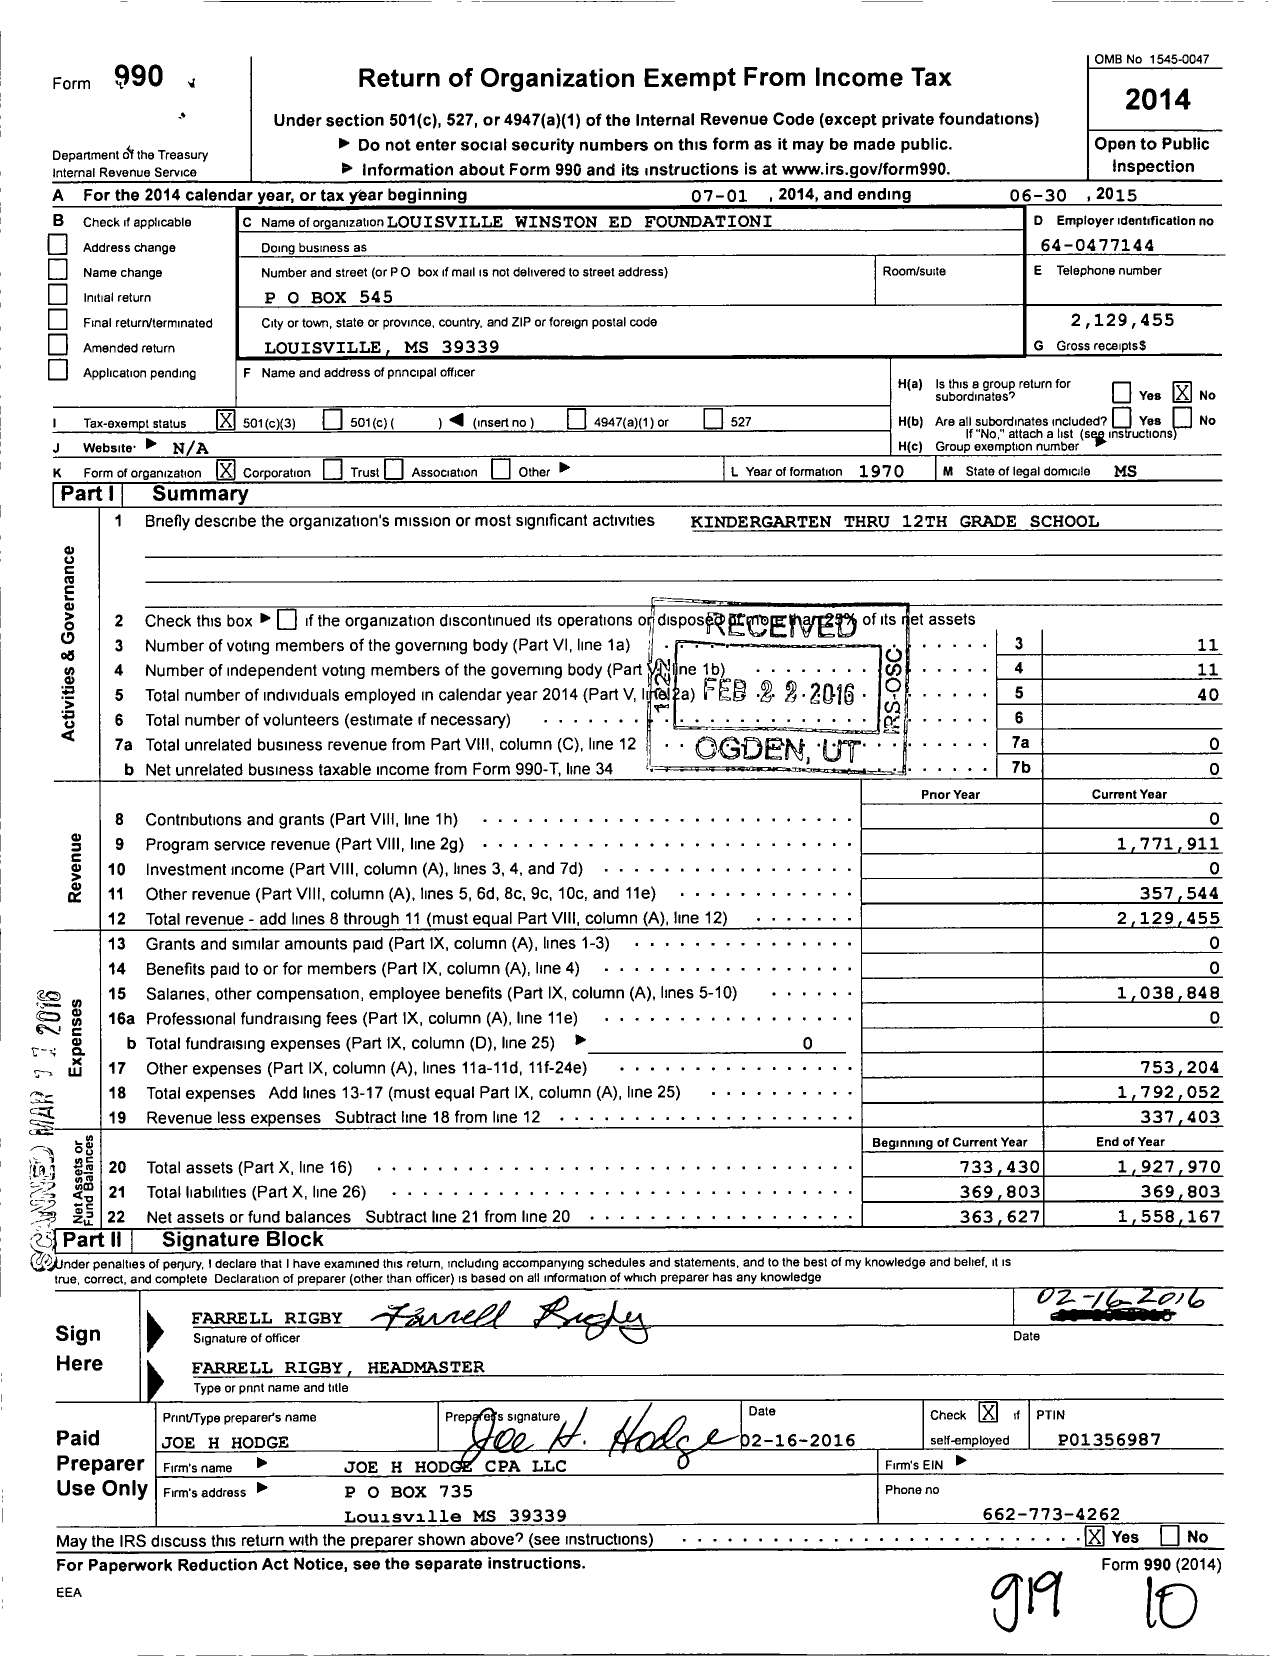 Image of first page of 2014 Form 990 for Louisville Winston Ed Foundation